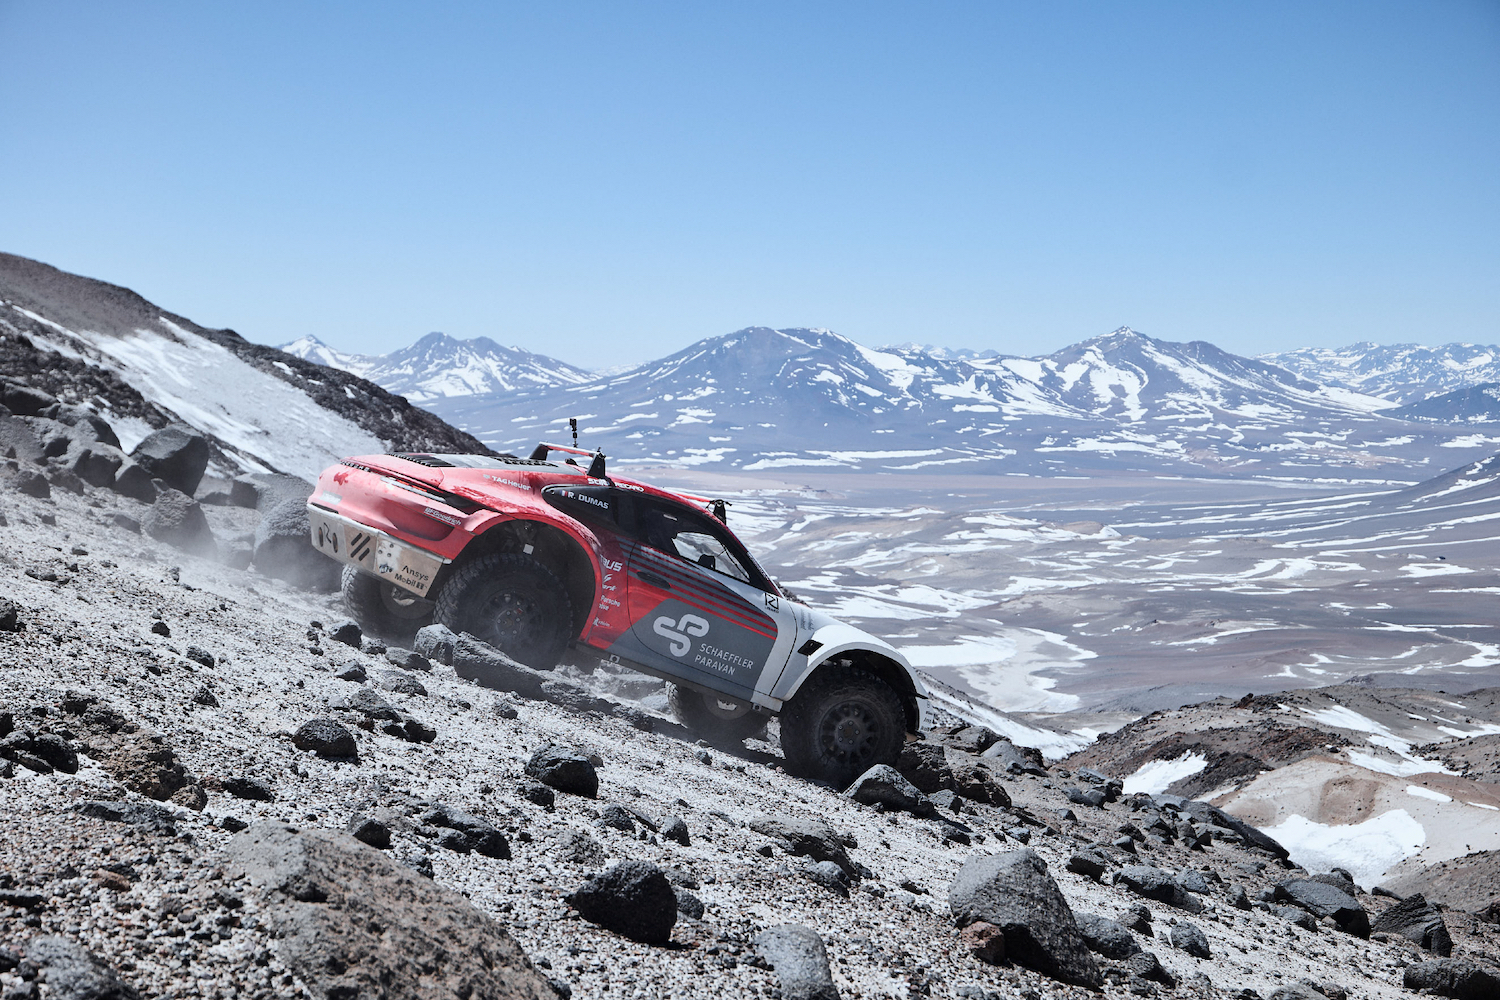 Porsche 911 Dakar Prototype going down a rocky terrain with snow on the ground with mountains in the back.